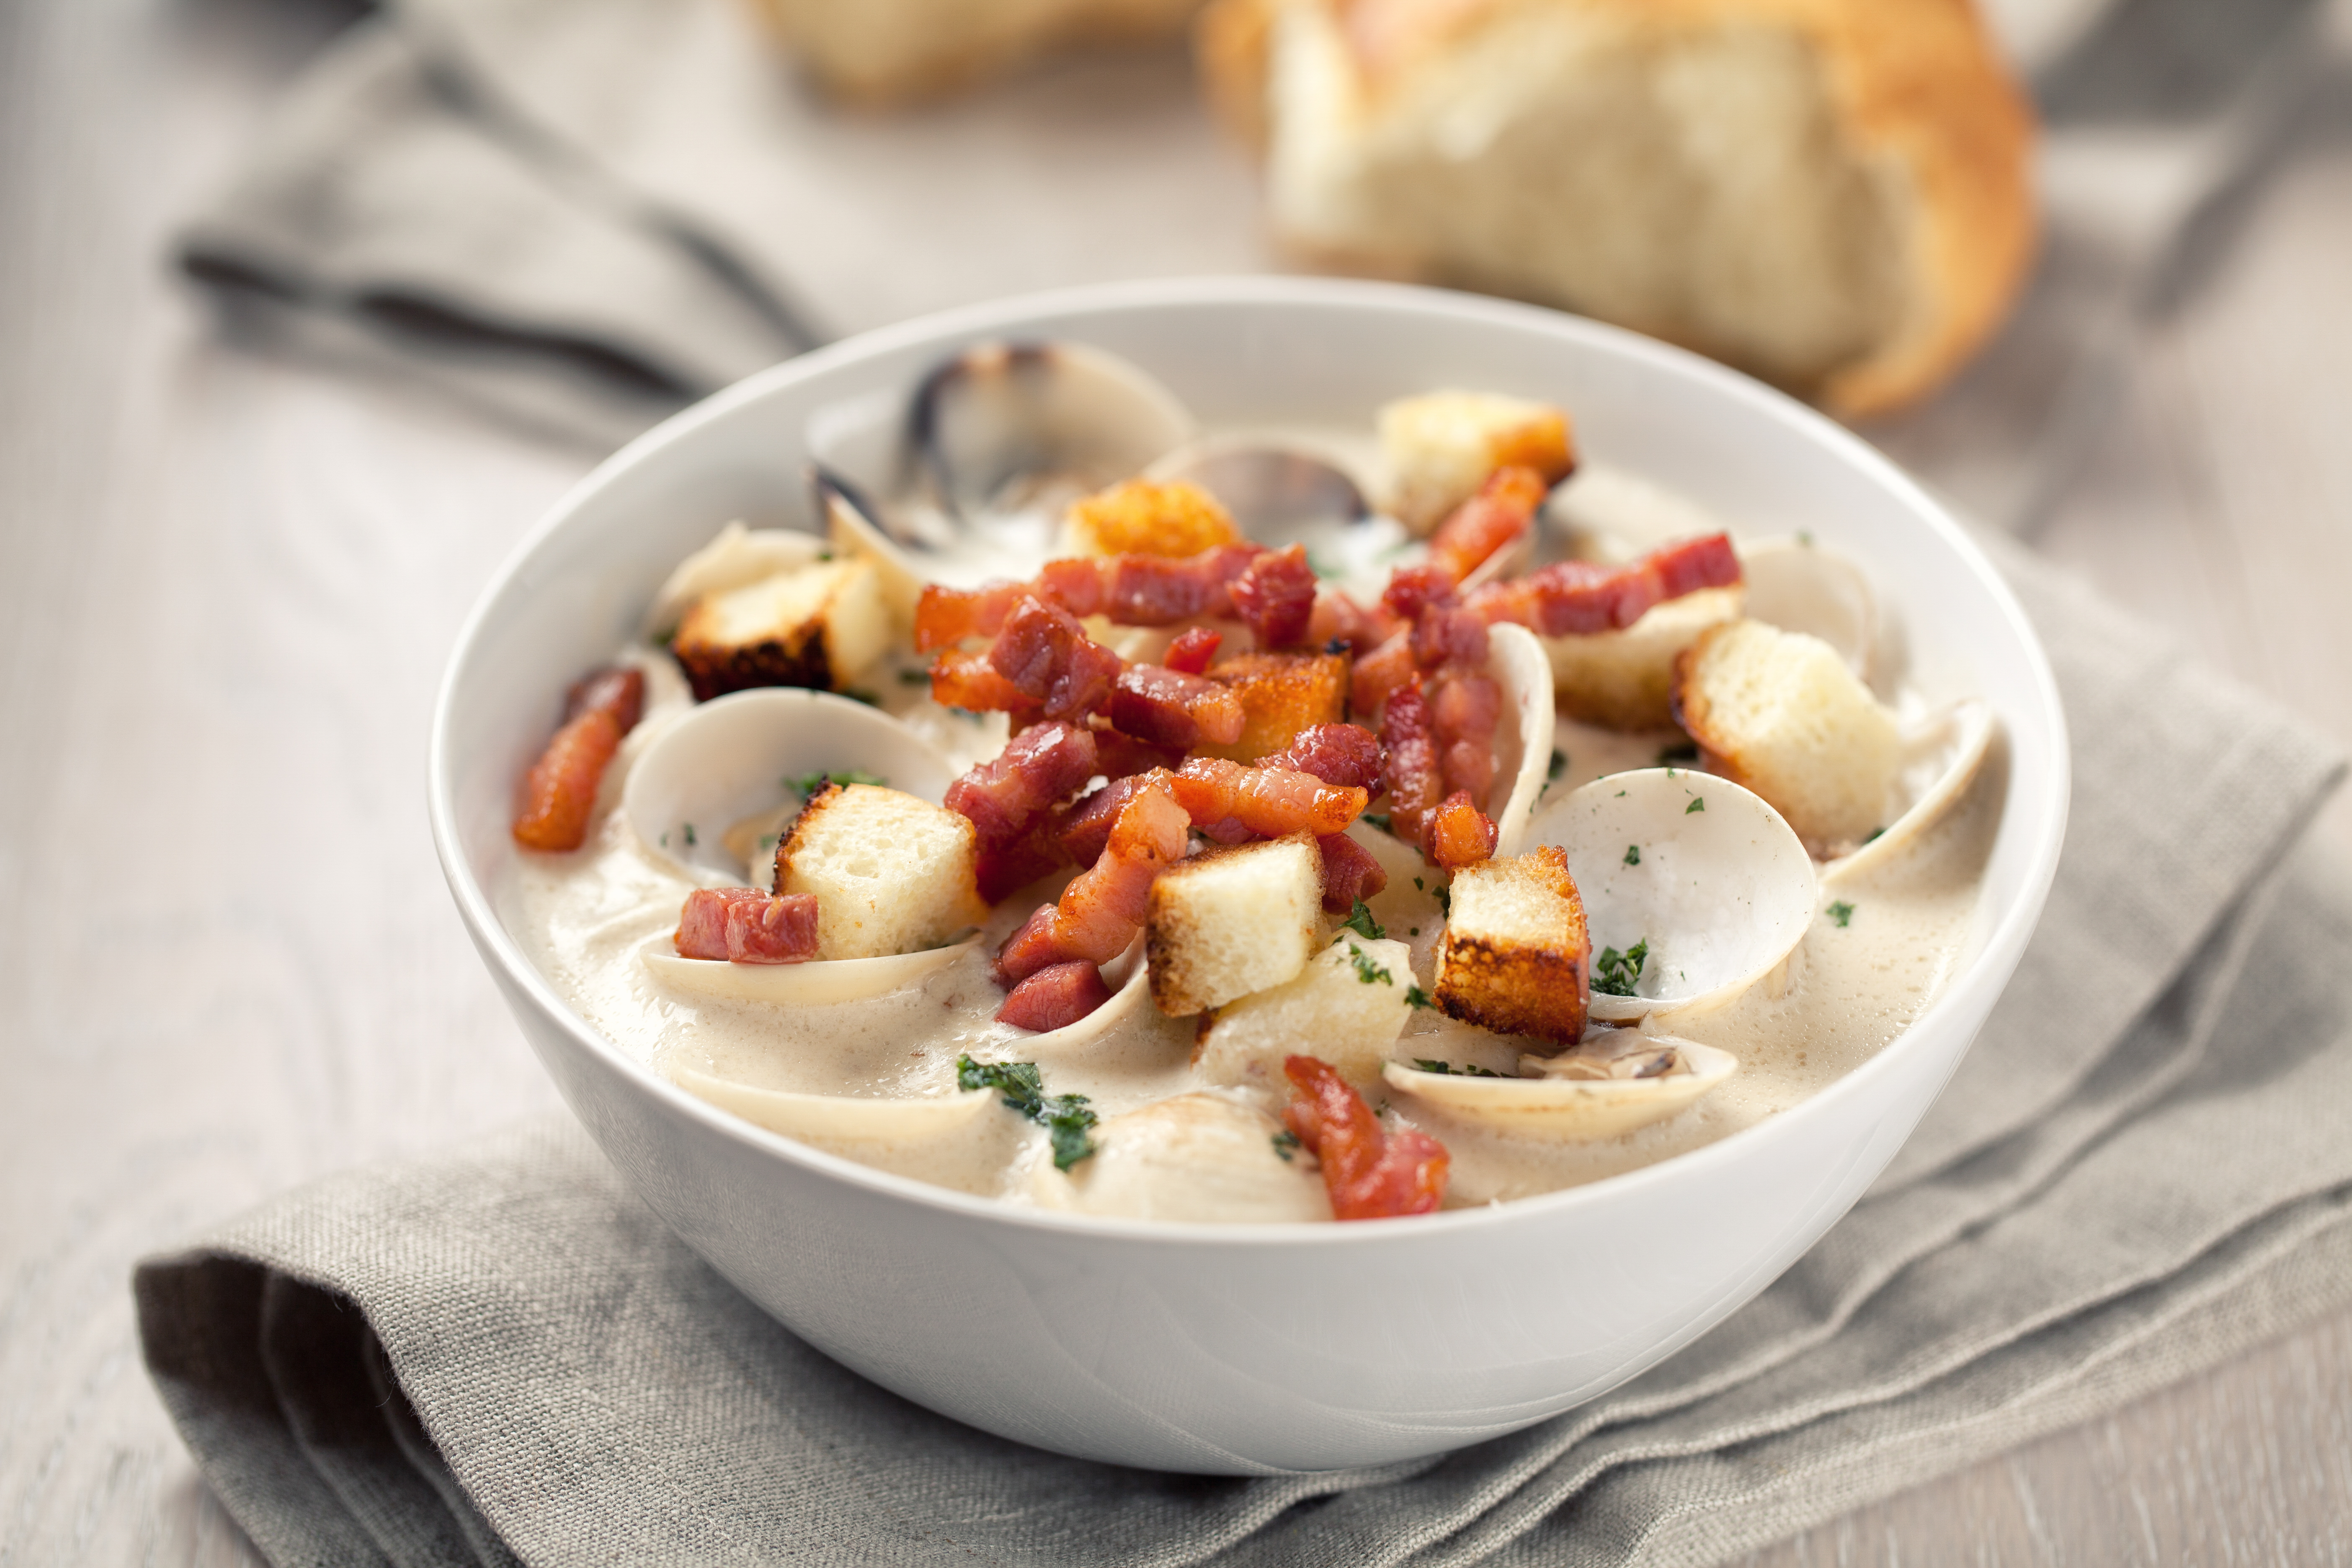 Celebrate National Clam Chowder Day - New England Clam Chowder in a Bowl